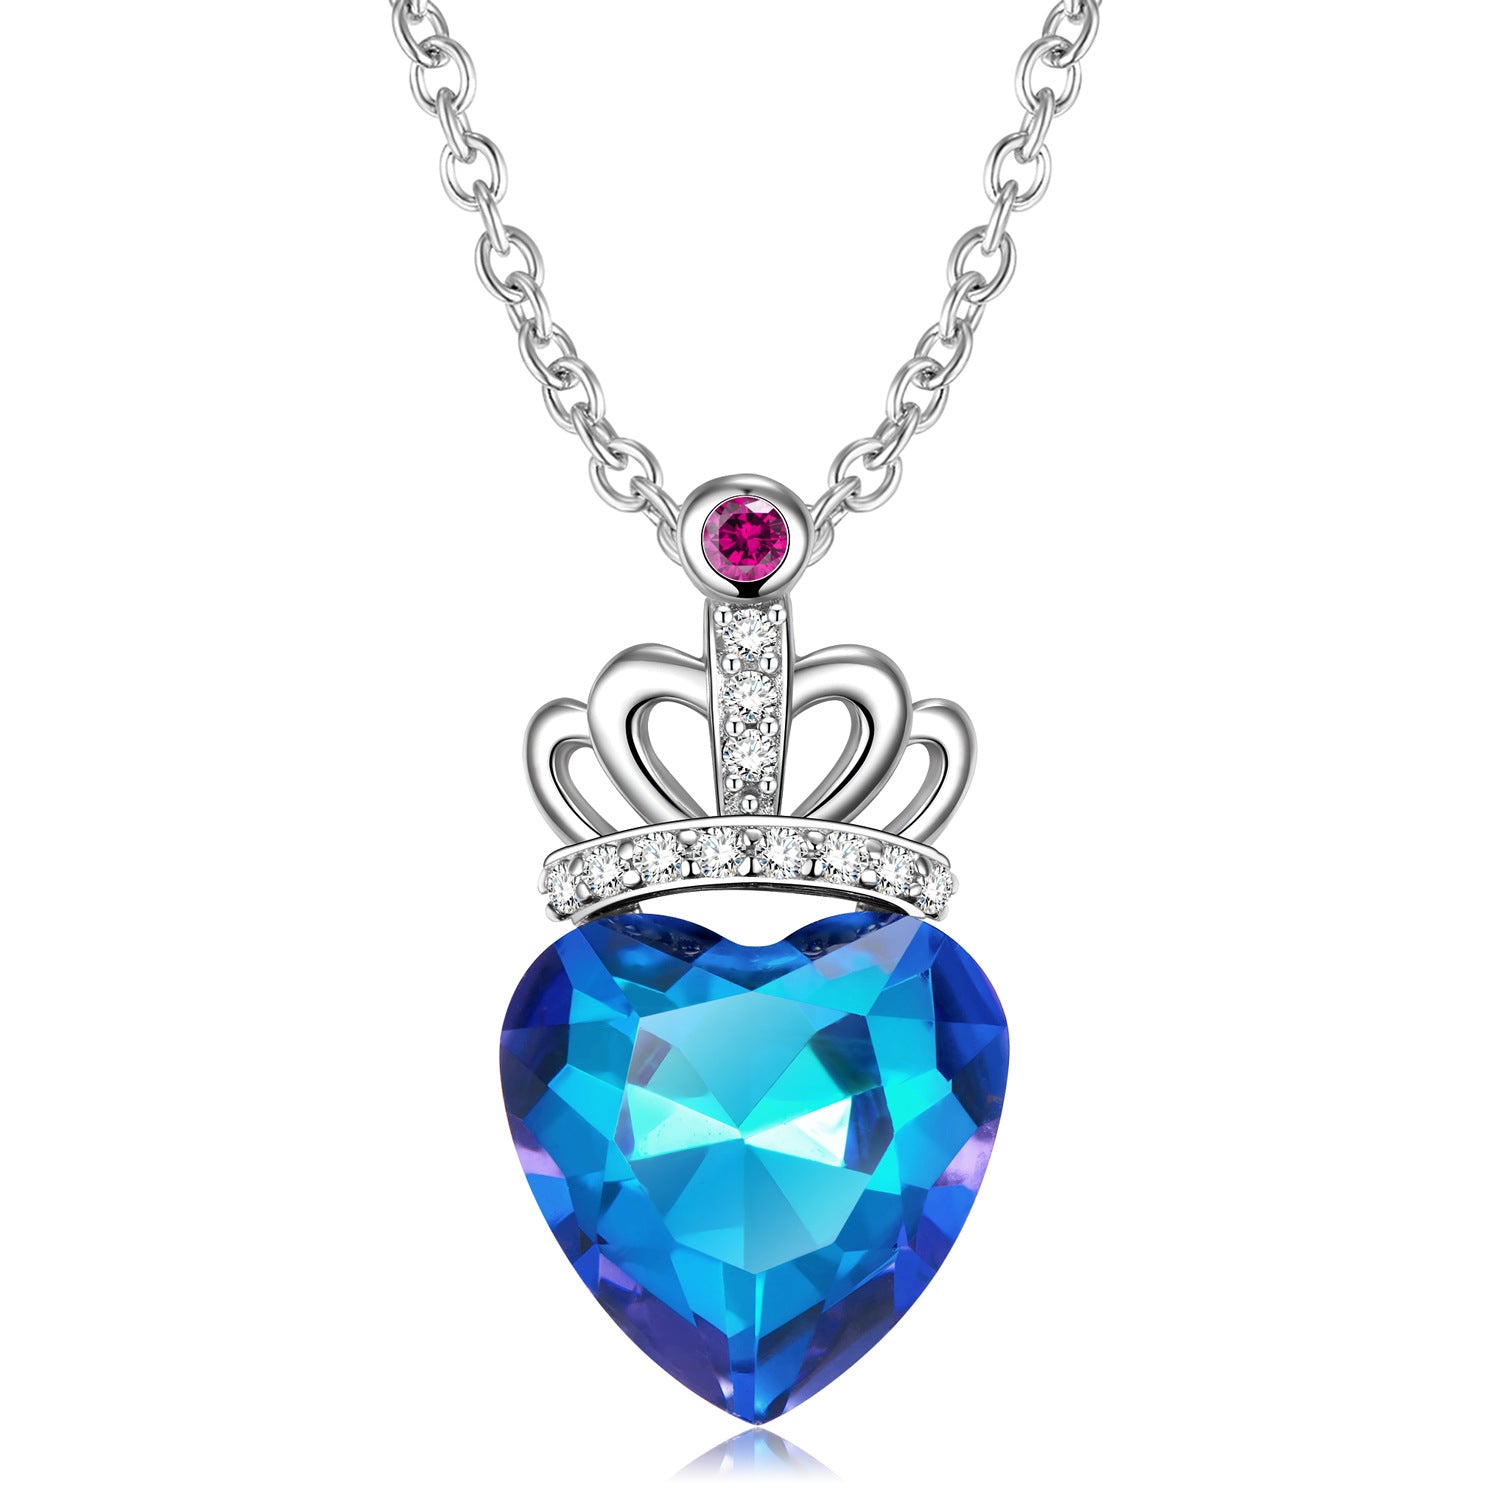 Blue Light Peach Heart Crown Necklace S925 Sterling Silver